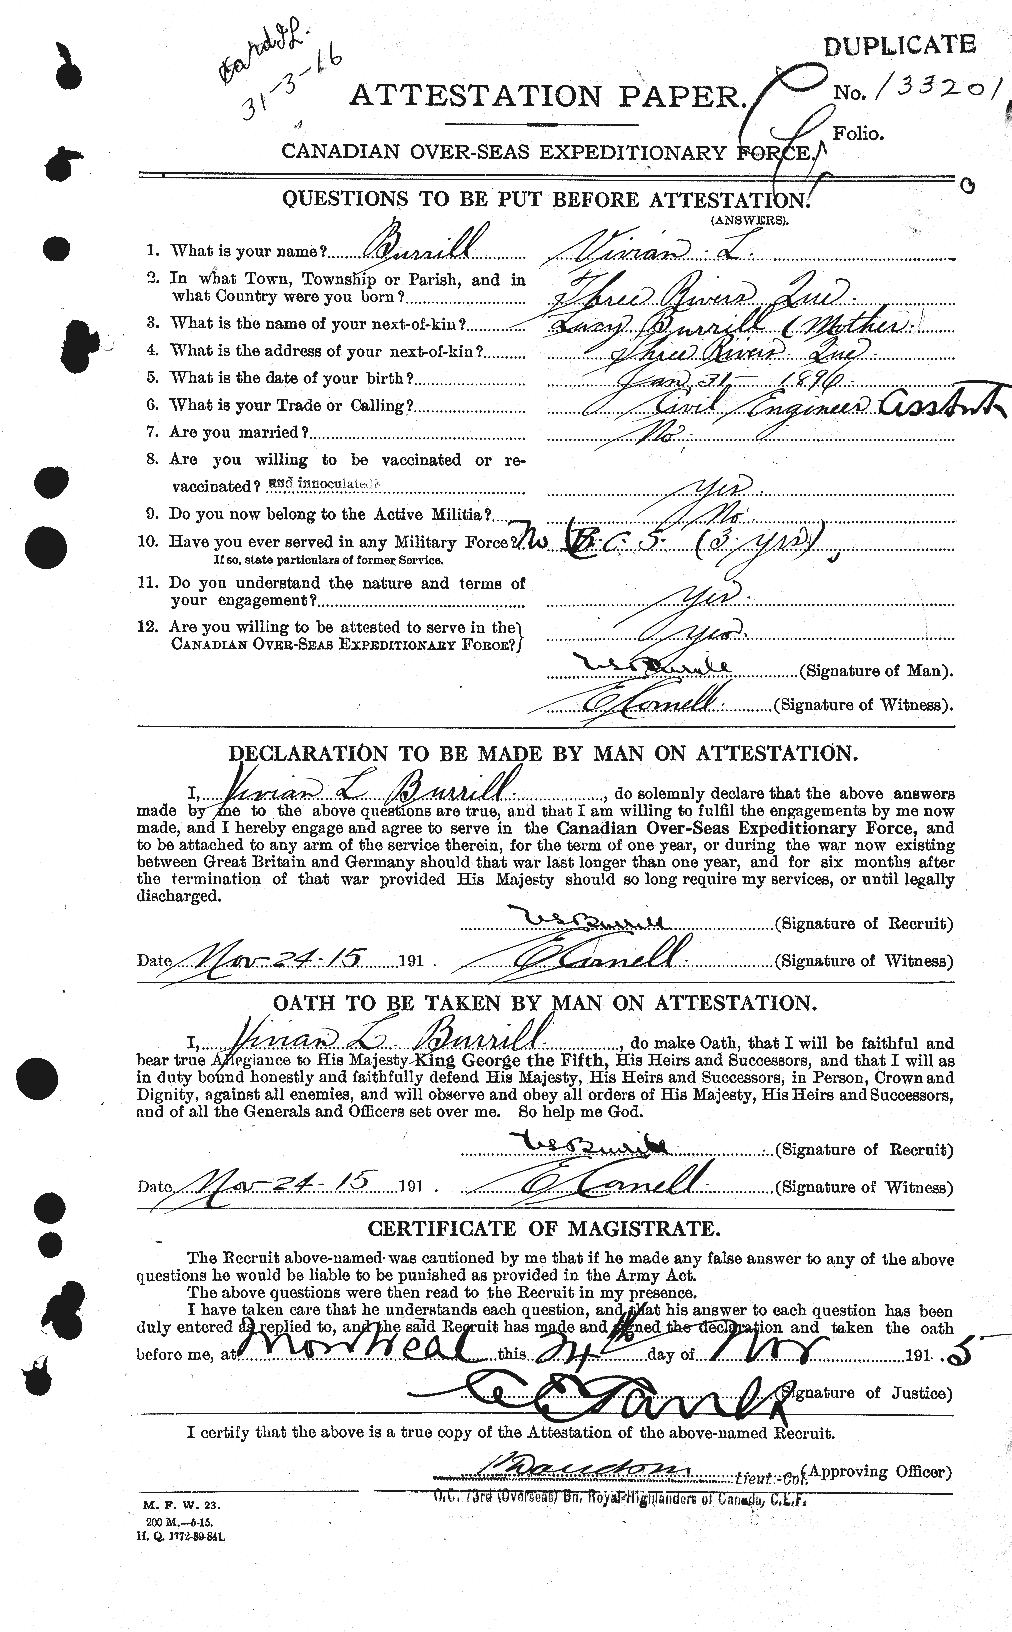 Personnel Records of the First World War - CEF 274682a